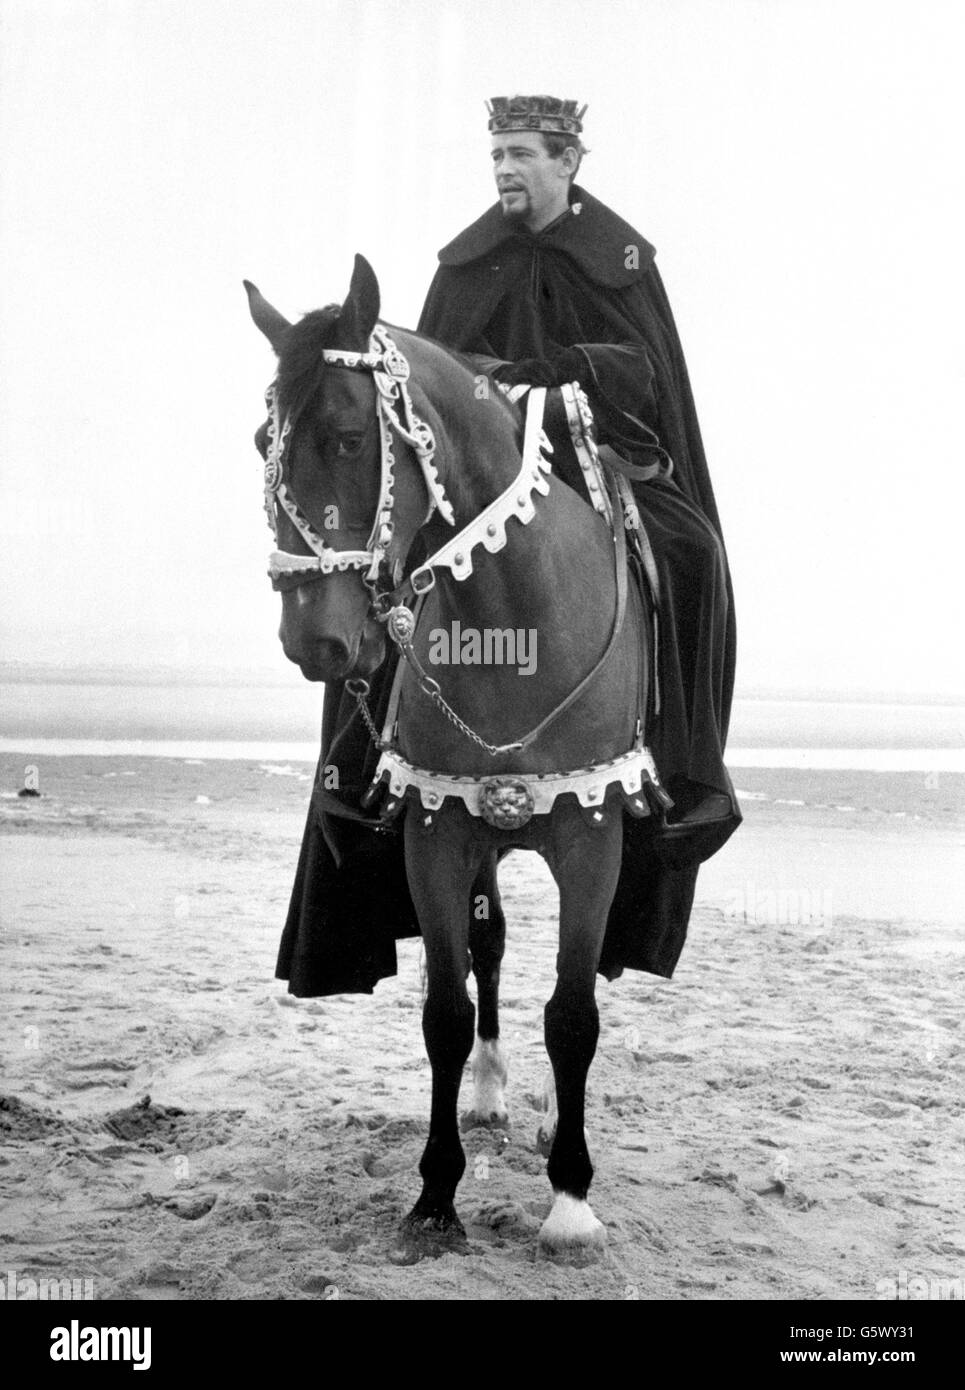 Peter O'Toole is pictured on horseback during the filming of Becket, which is being made at Shepperton Studios in Surrey. Stock Photo